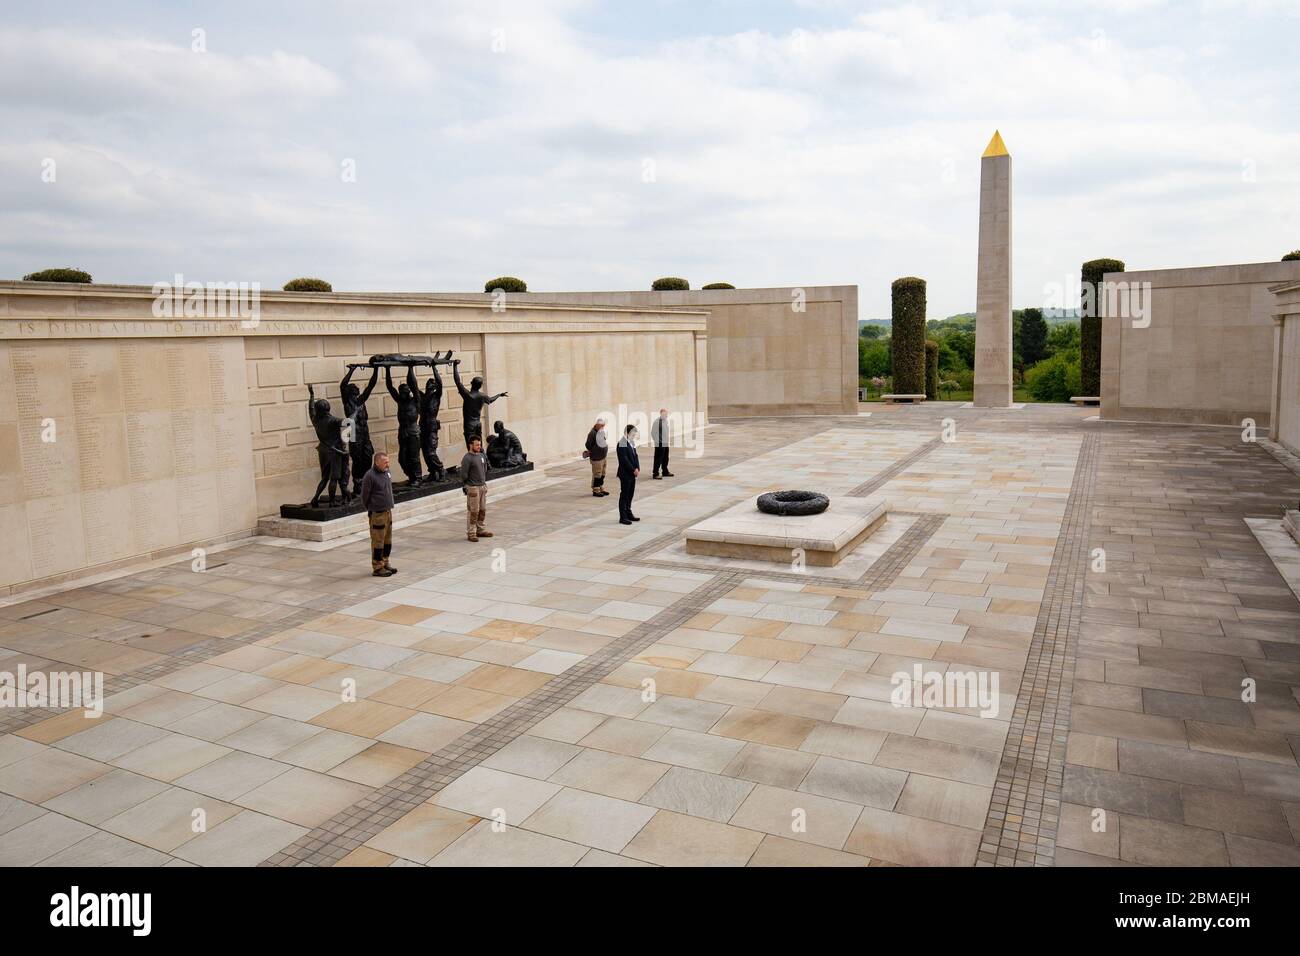 Staff at the deserted National Memorial Arboretum in Alrewas, Staffordshire, observe a two minutes' silence to commemorate the 75th anniversary of VE Day. Mark Ellis, head of visitor experience, laid a wreath. Normally the Arboretum would welcome around 10,000 visitors to mark such an occasion. Stock Photo